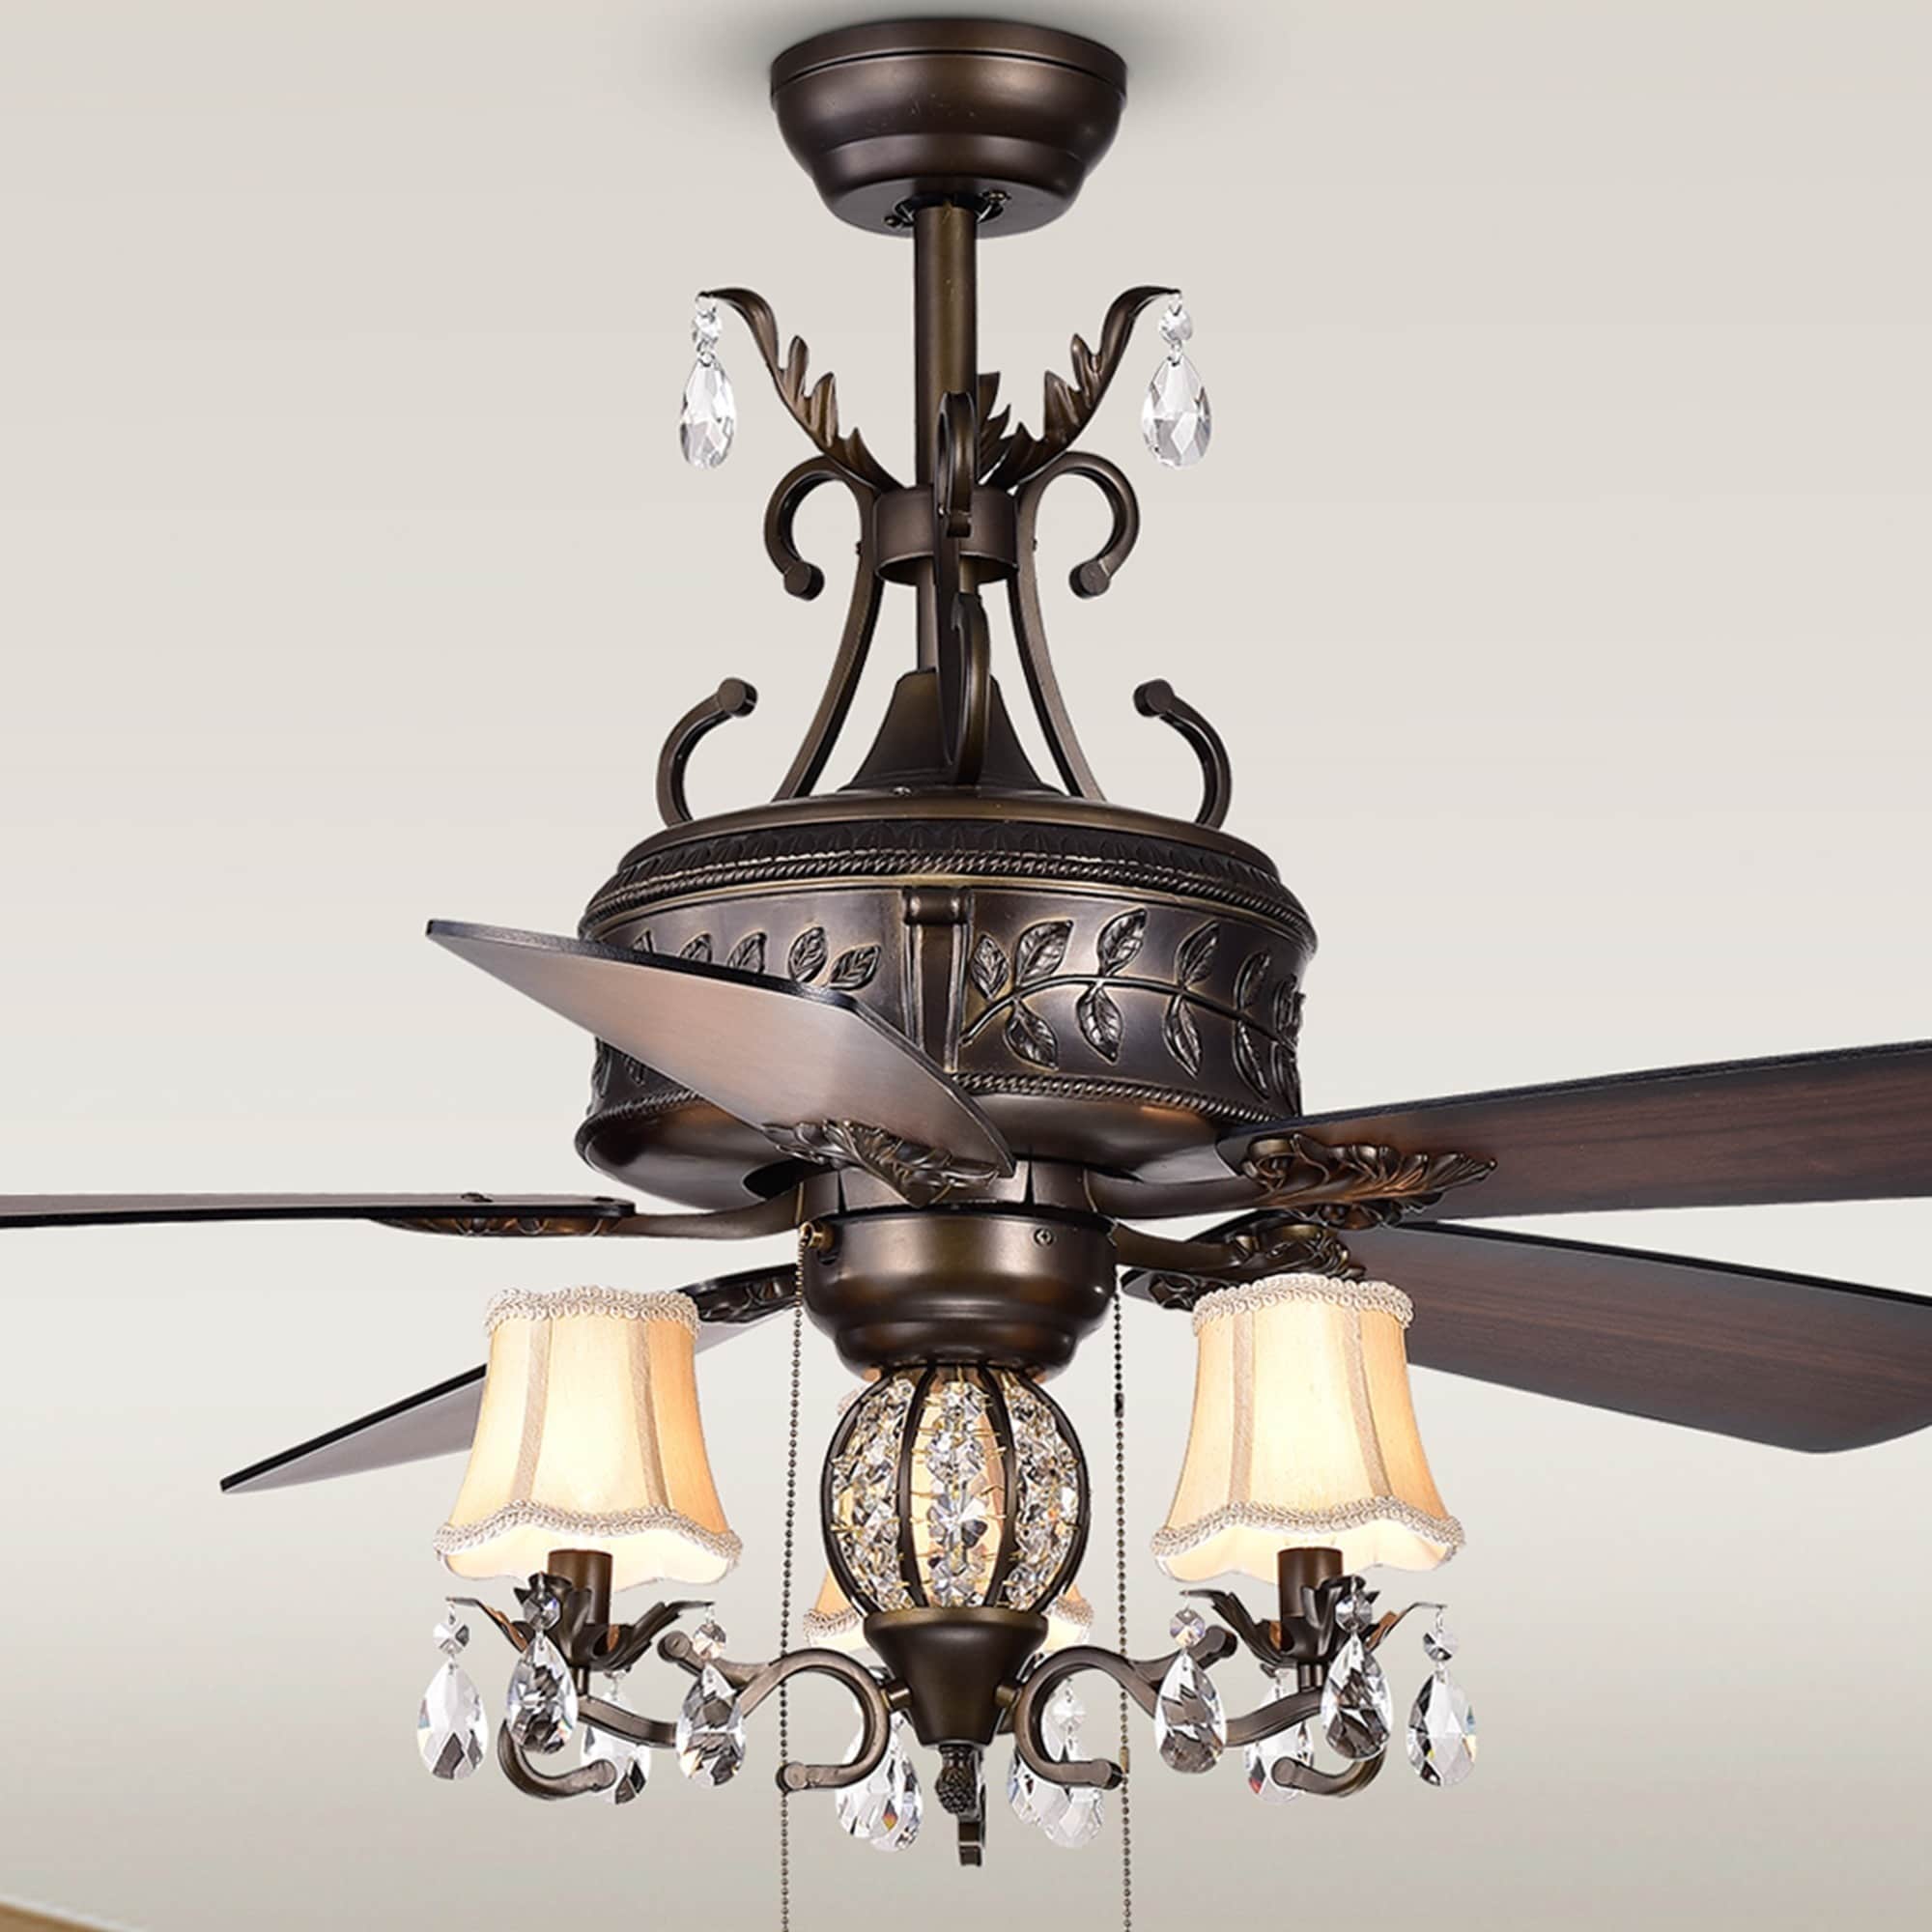 52 Inch Five Blade Antique Lighted Ceiling Fans With Branched French Chandelier